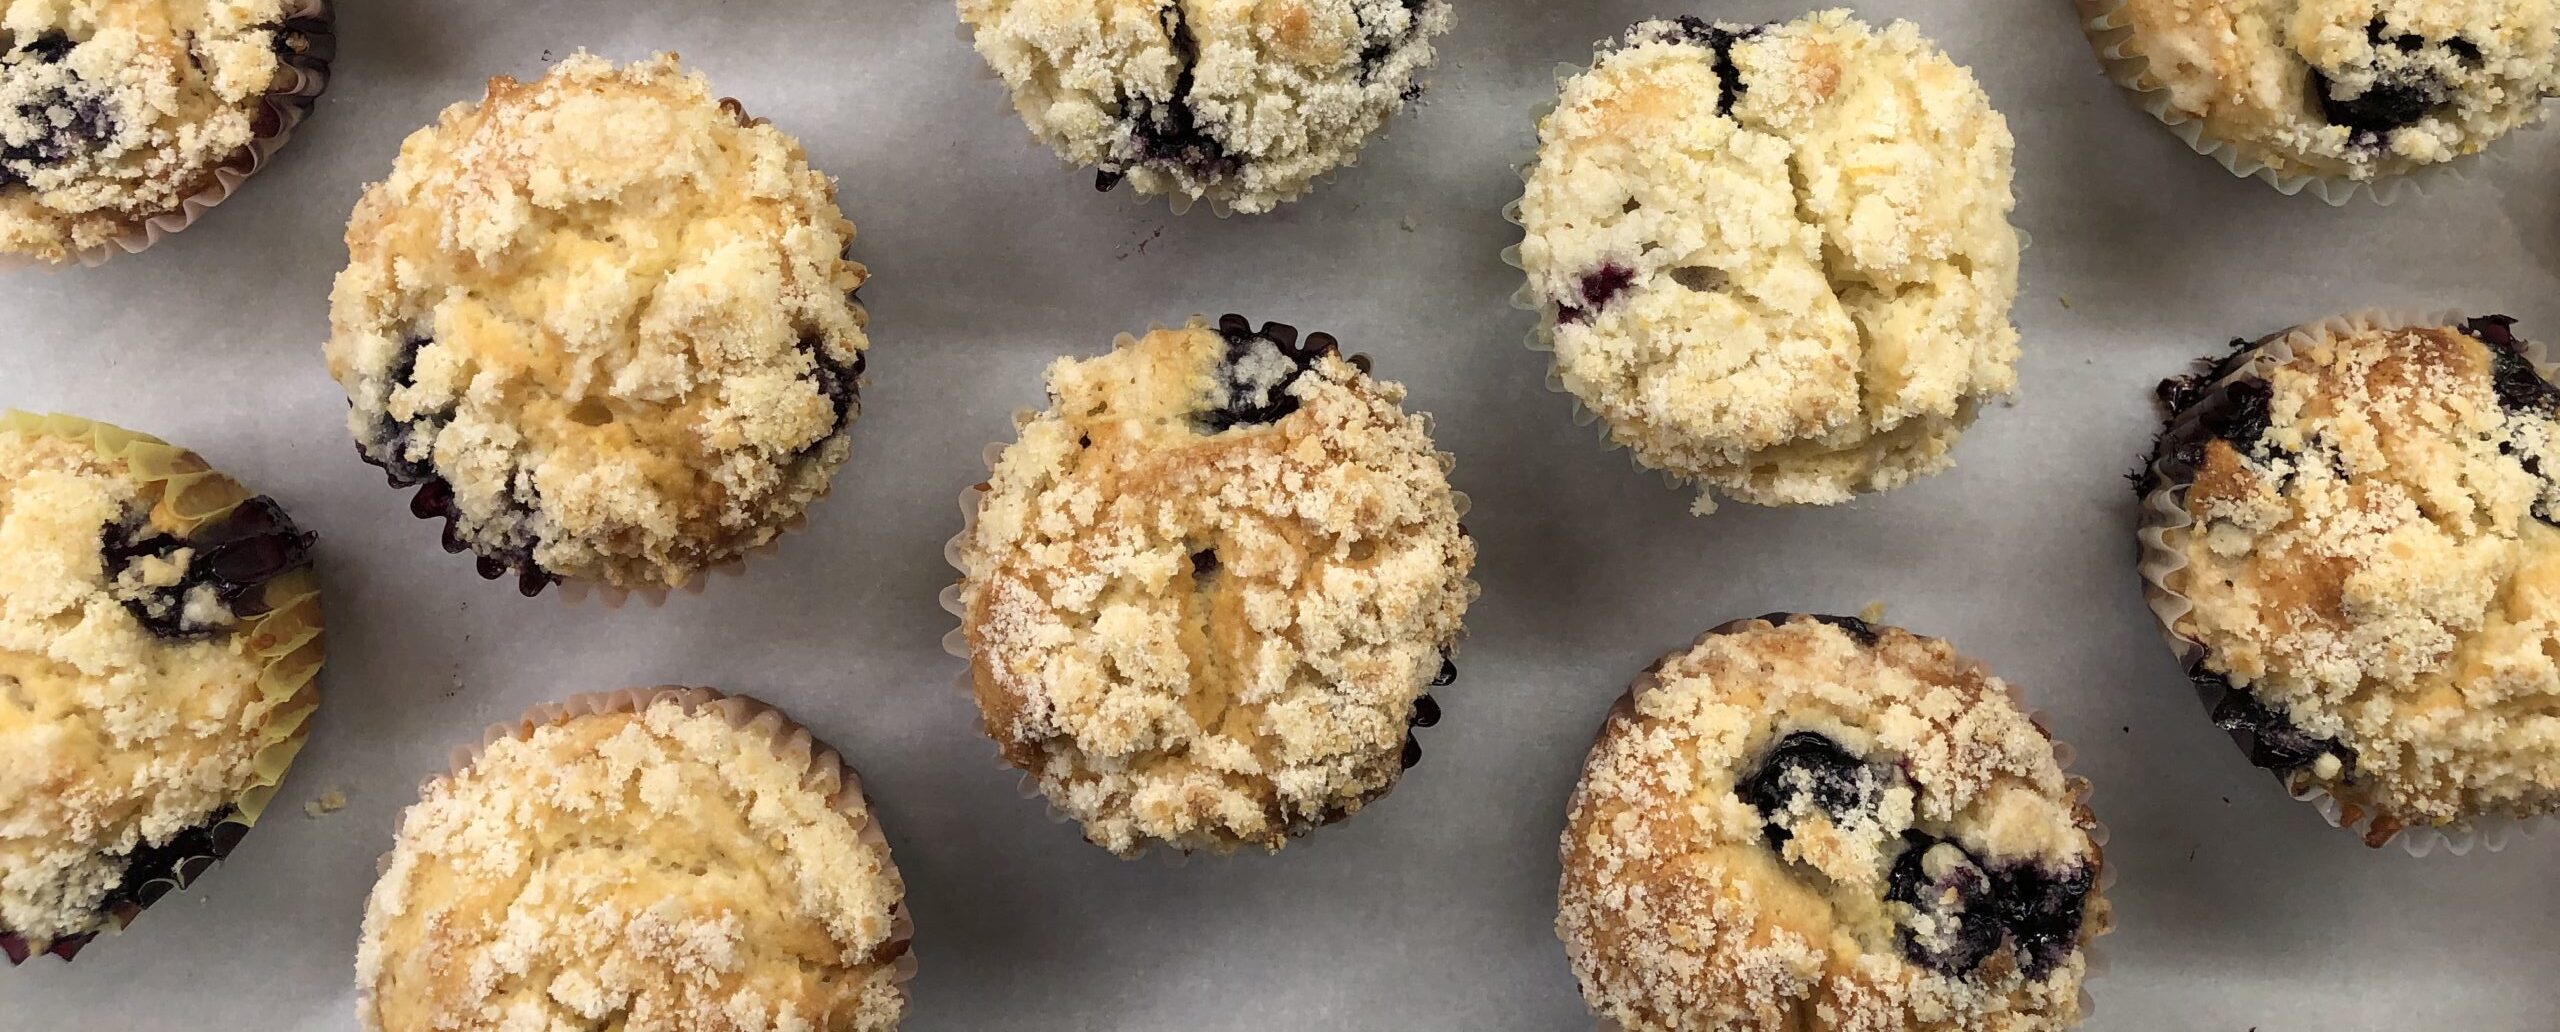 Mouth-Watering Lemon Blueberry Muffins